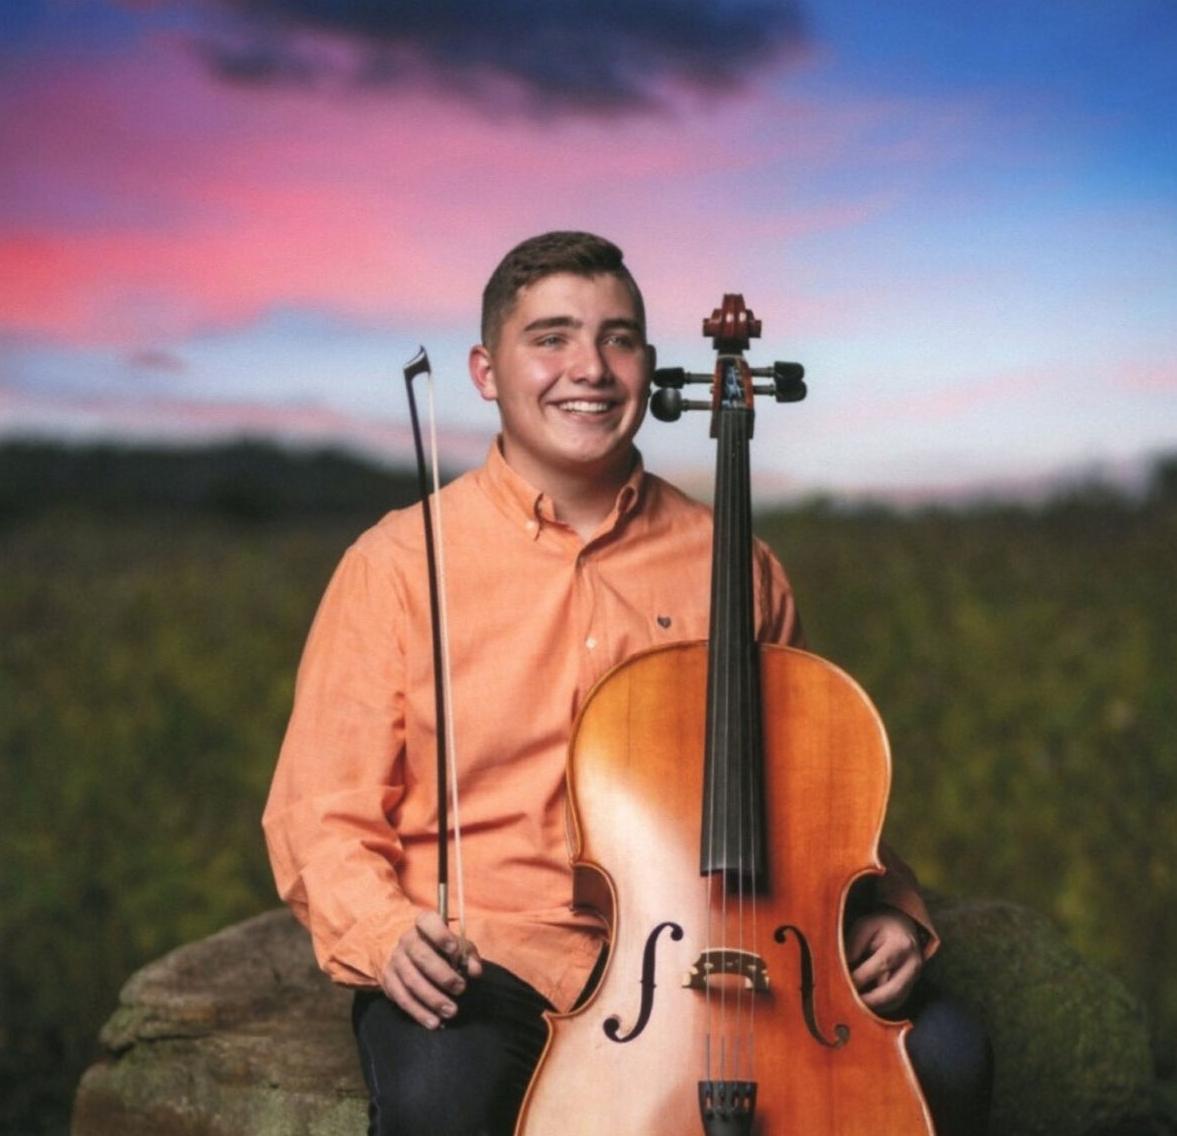 Watertown cellist, 17, earns perfect state score